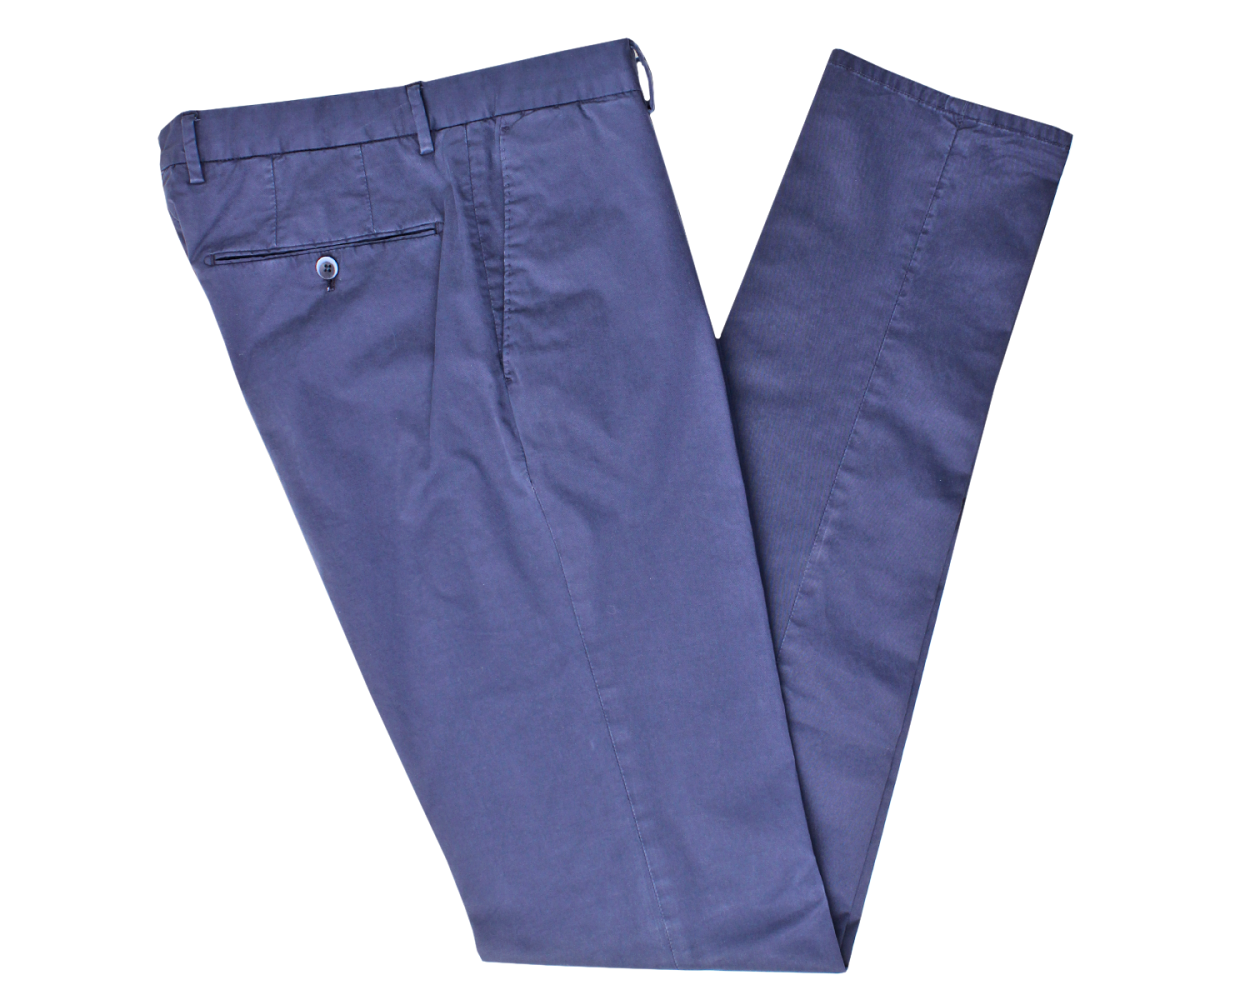 Blue Womens Clothing Trousers Gas Cotton Trouser in Dark Blue Slacks and Chinos Skinny trousers 